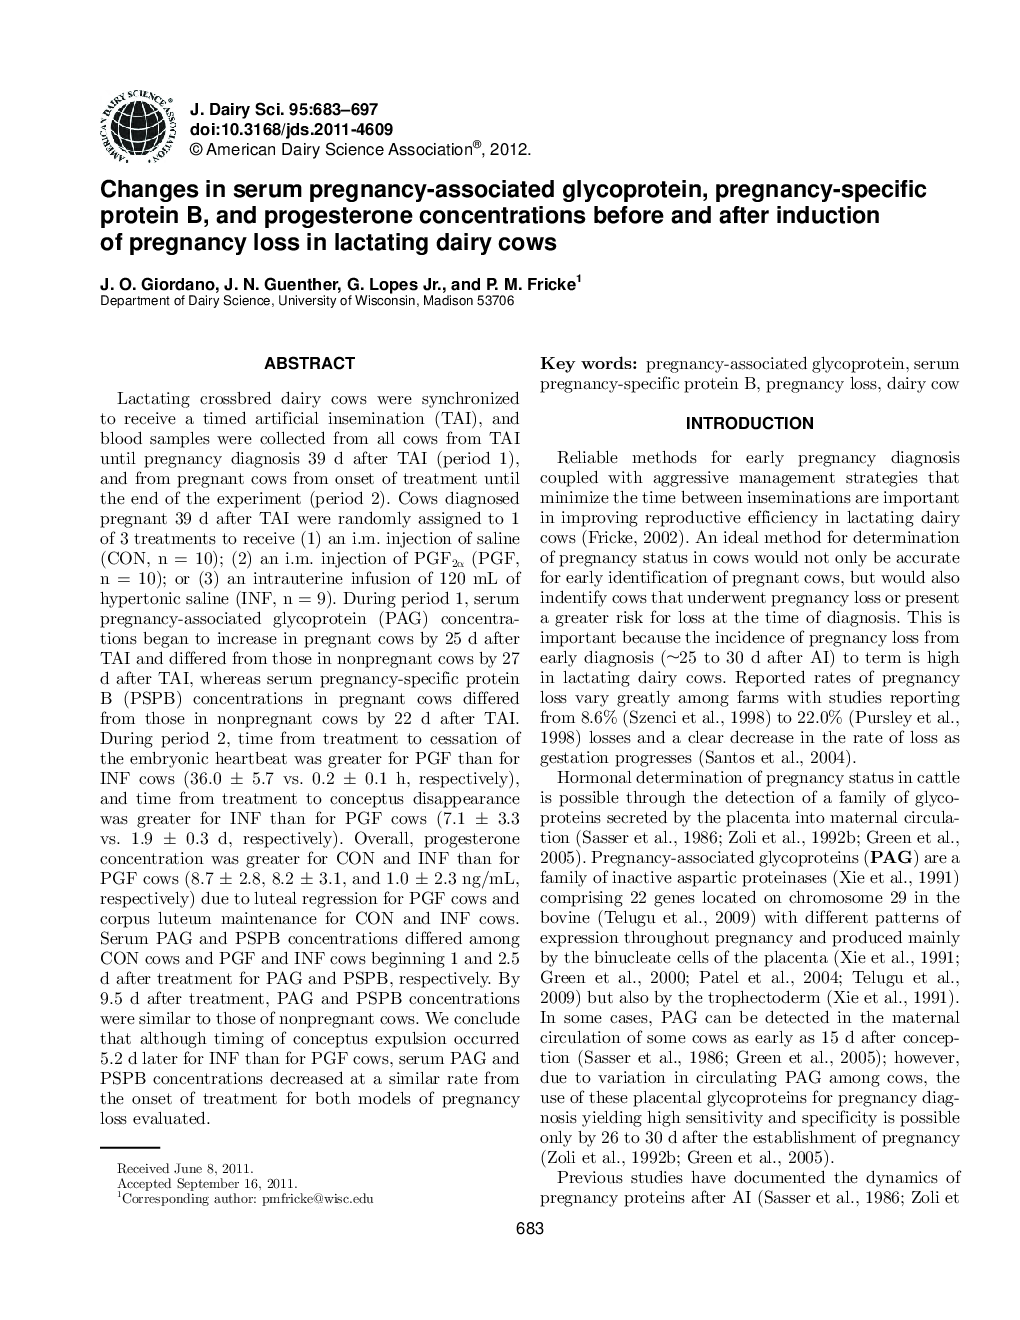 Changes in serum pregnancy-associated glycoprotein, pregnancy-specific protein B, and progesterone concentrations before and after induction of pregnancy loss in lactating dairy cows